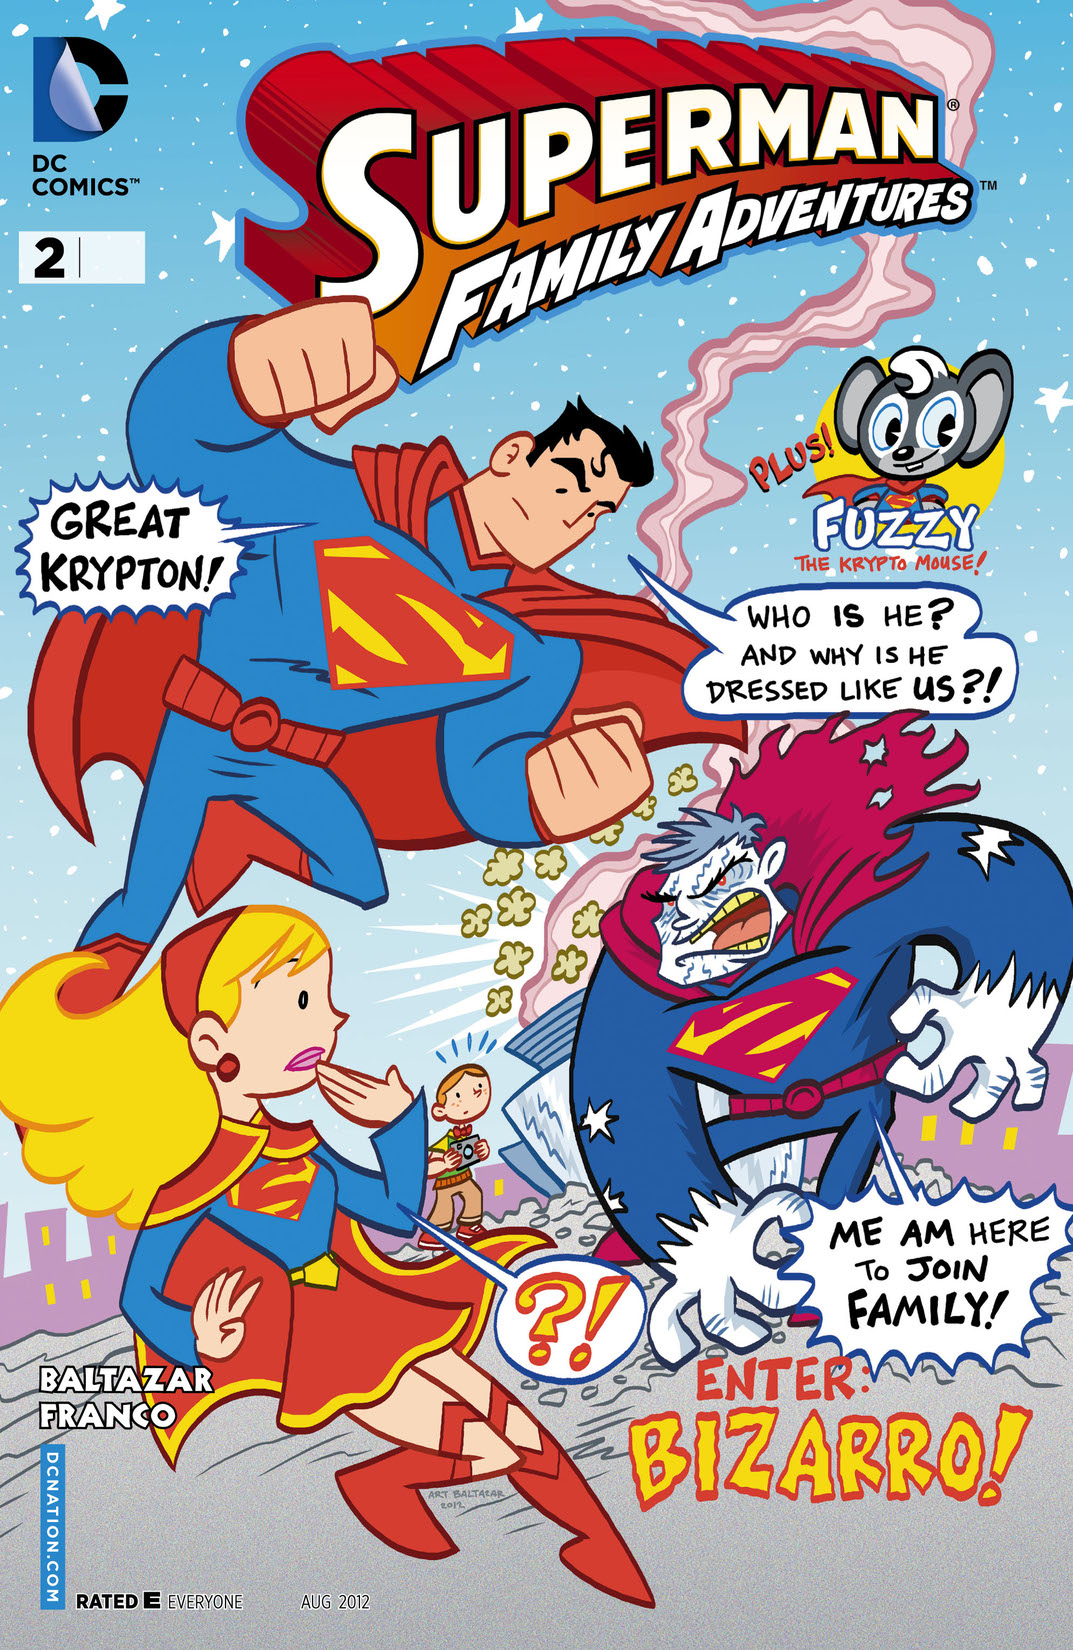 Superman Family Adventures #2 preview images